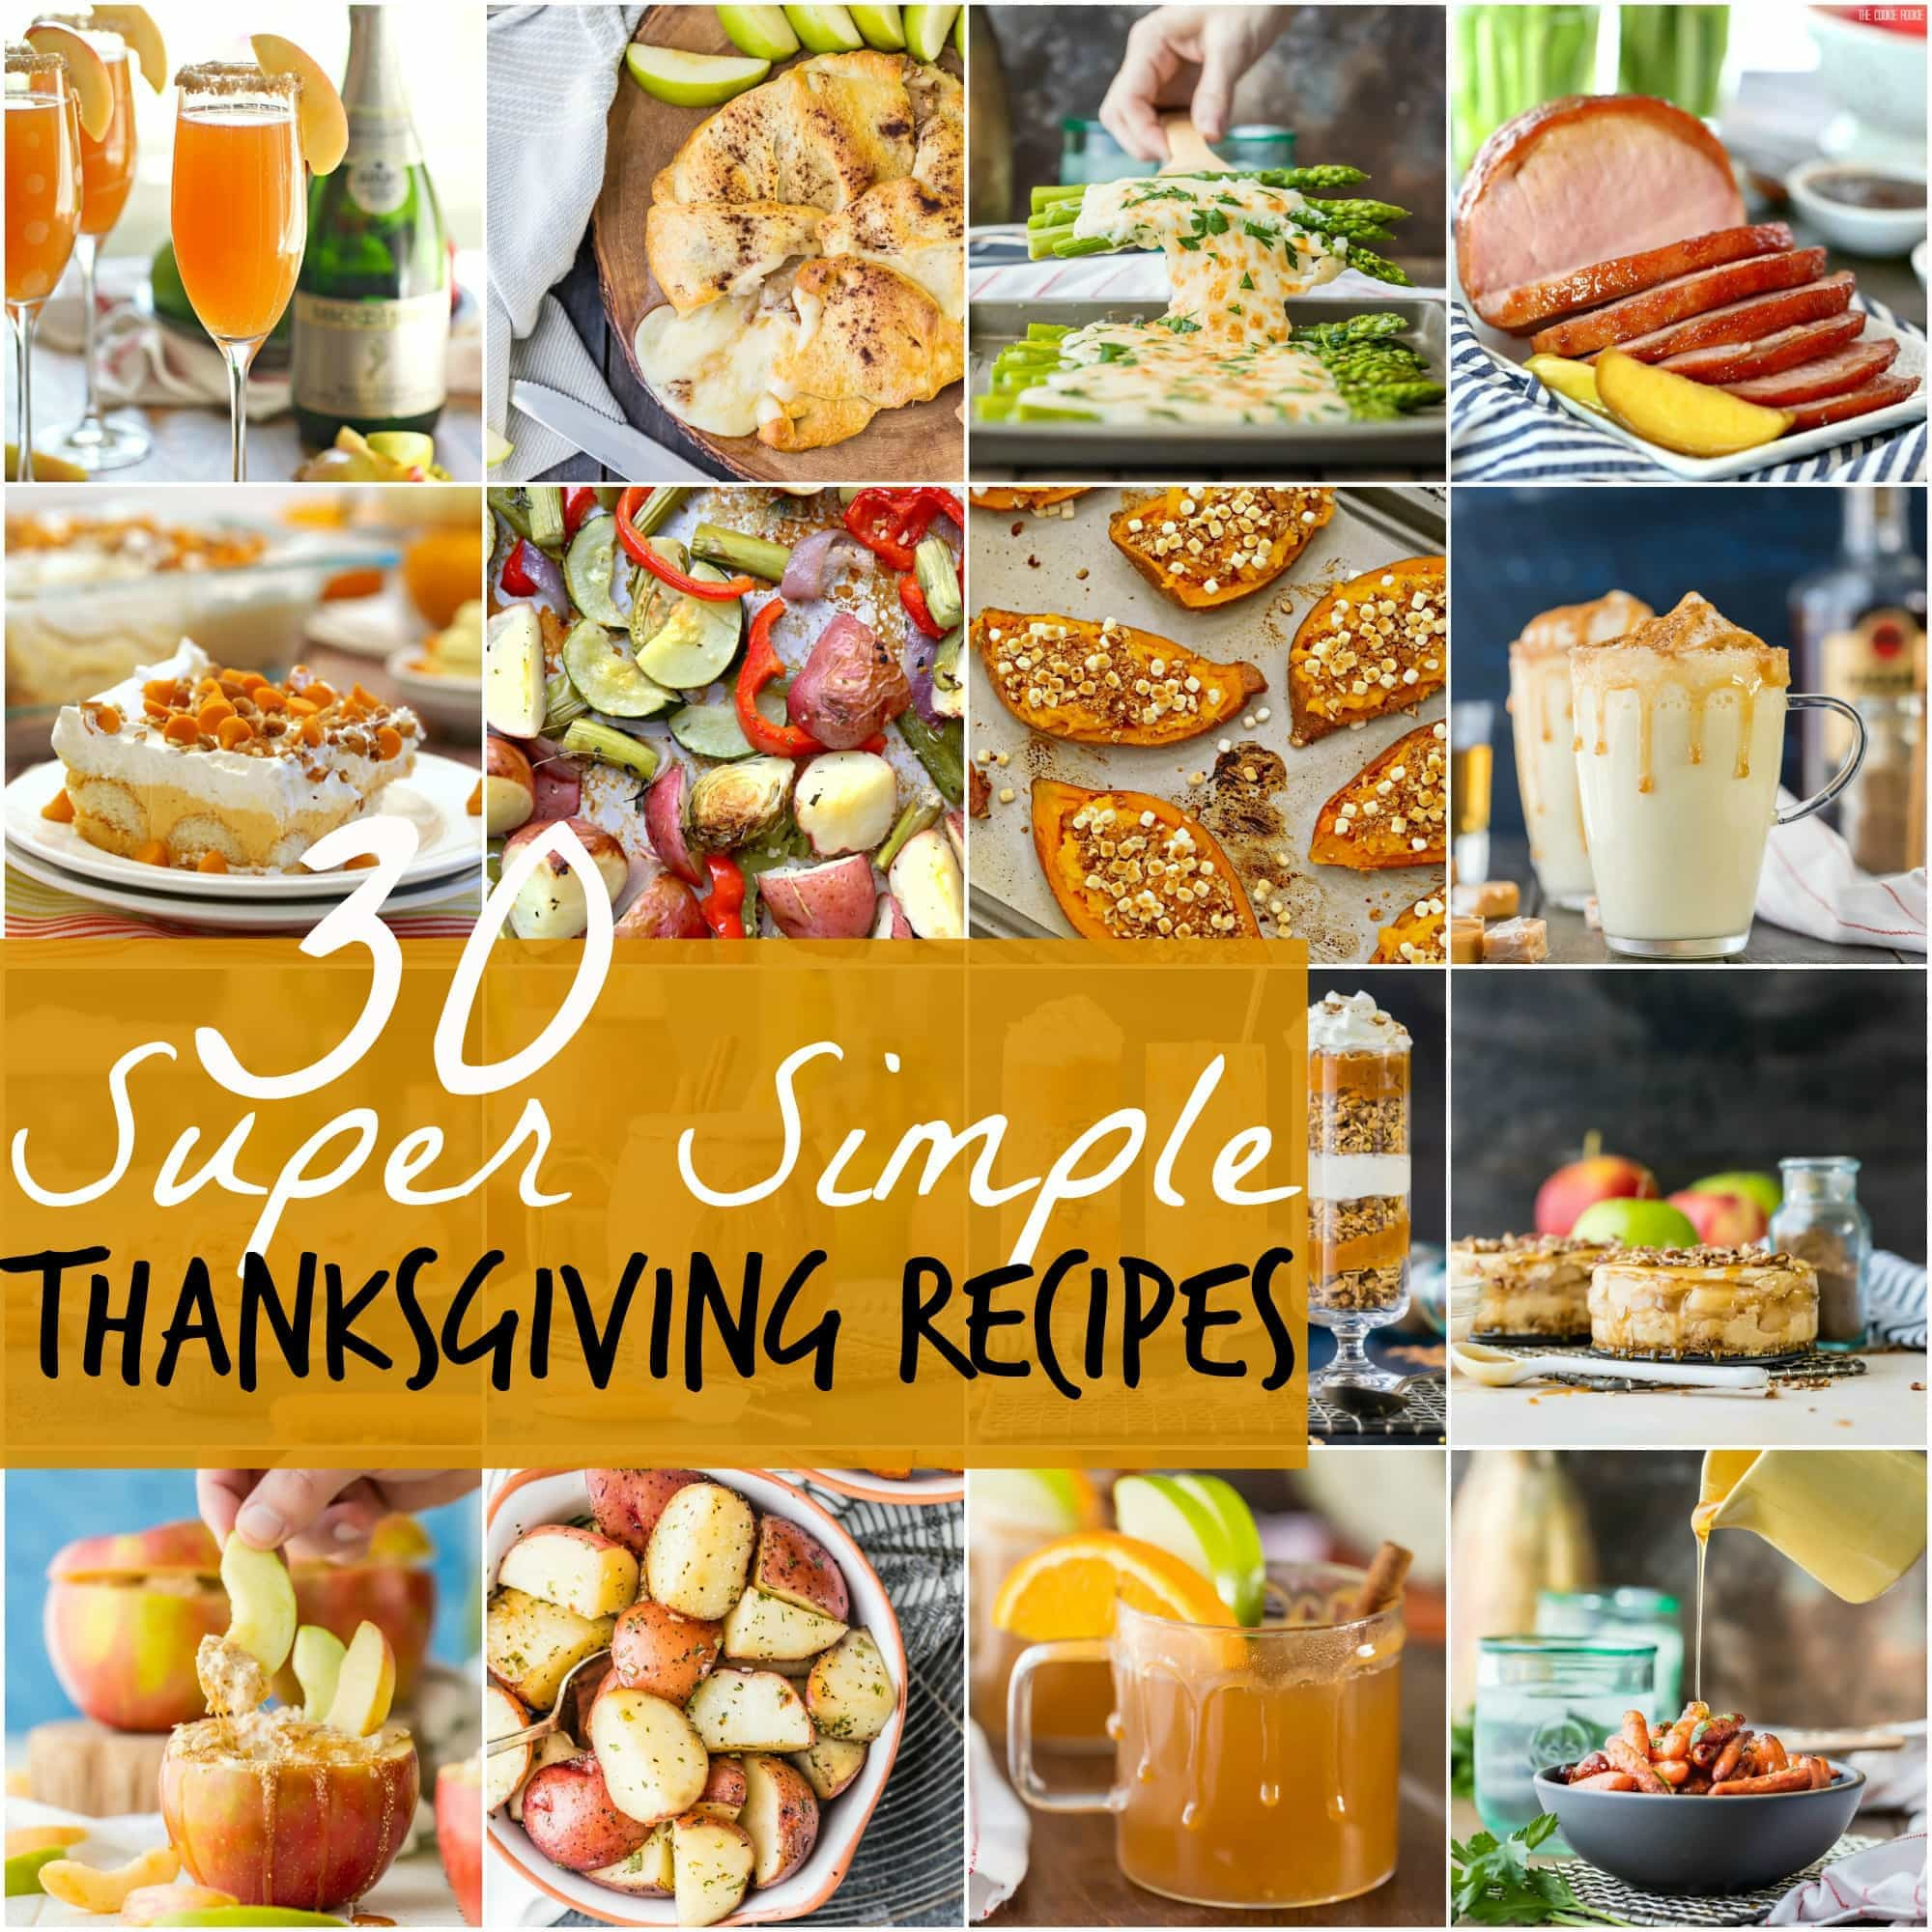 Easy Thanksgiving Food
 30 SUPER SIMPLE Thanksgiving Recipes